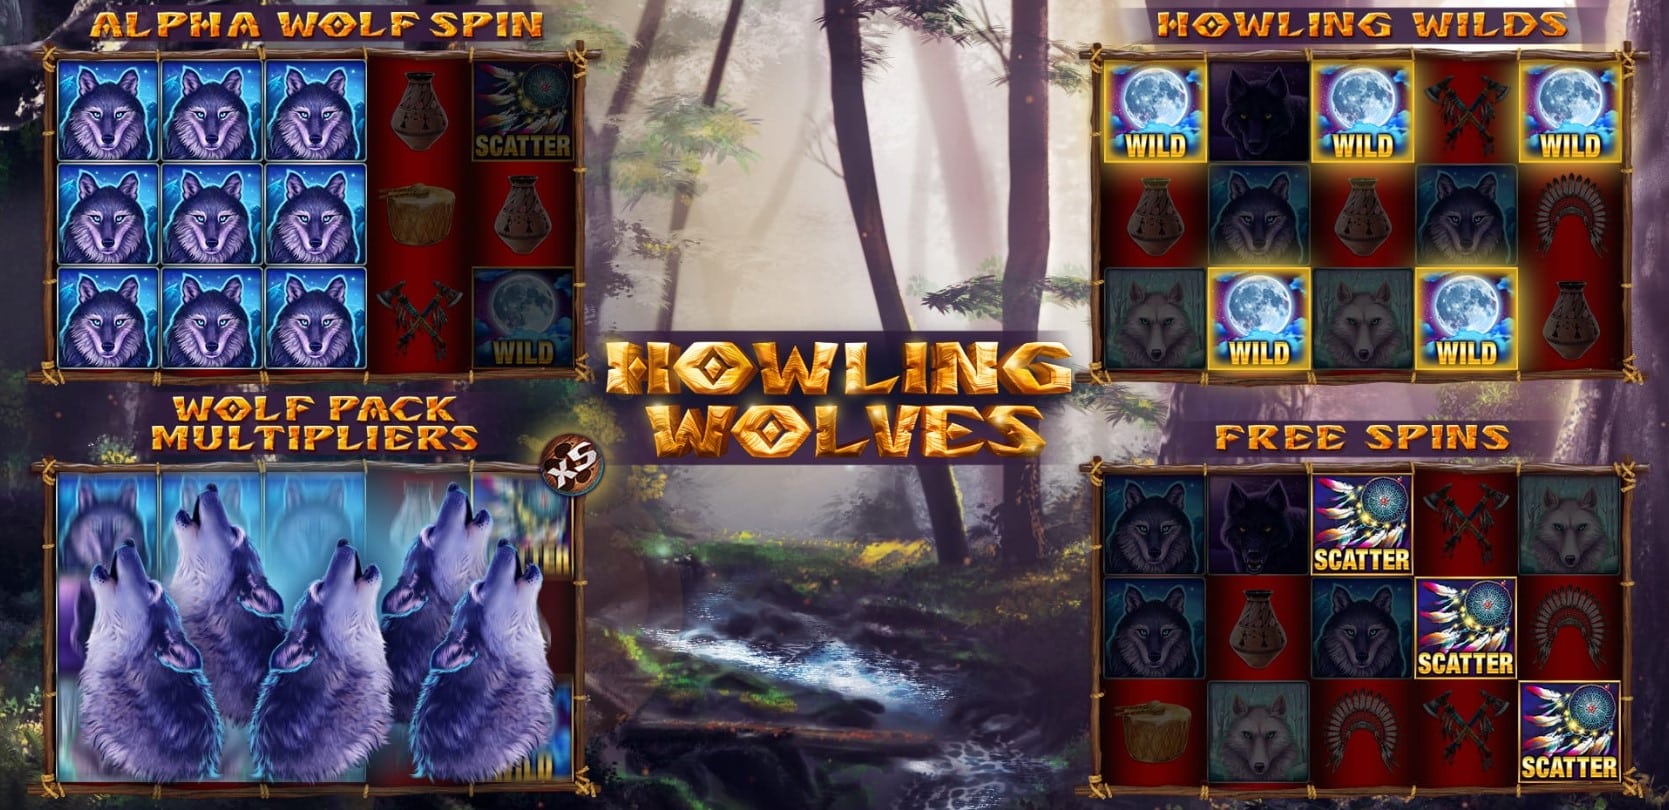 Howling Wolves Slot Features